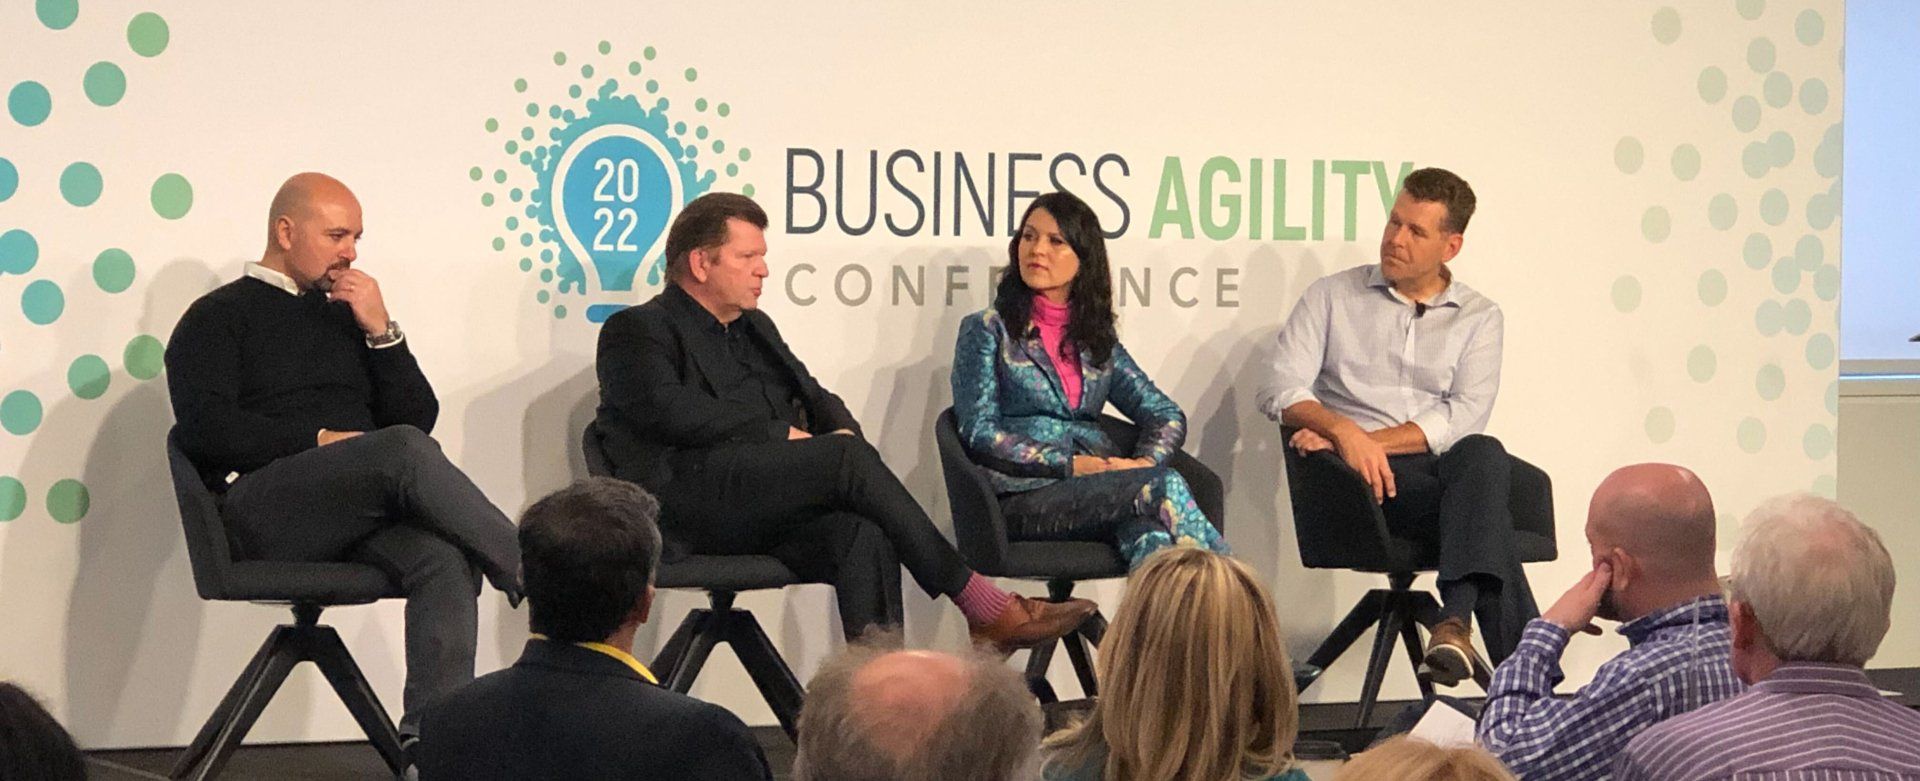 Three men and a woman sit on stage at the business agility conference